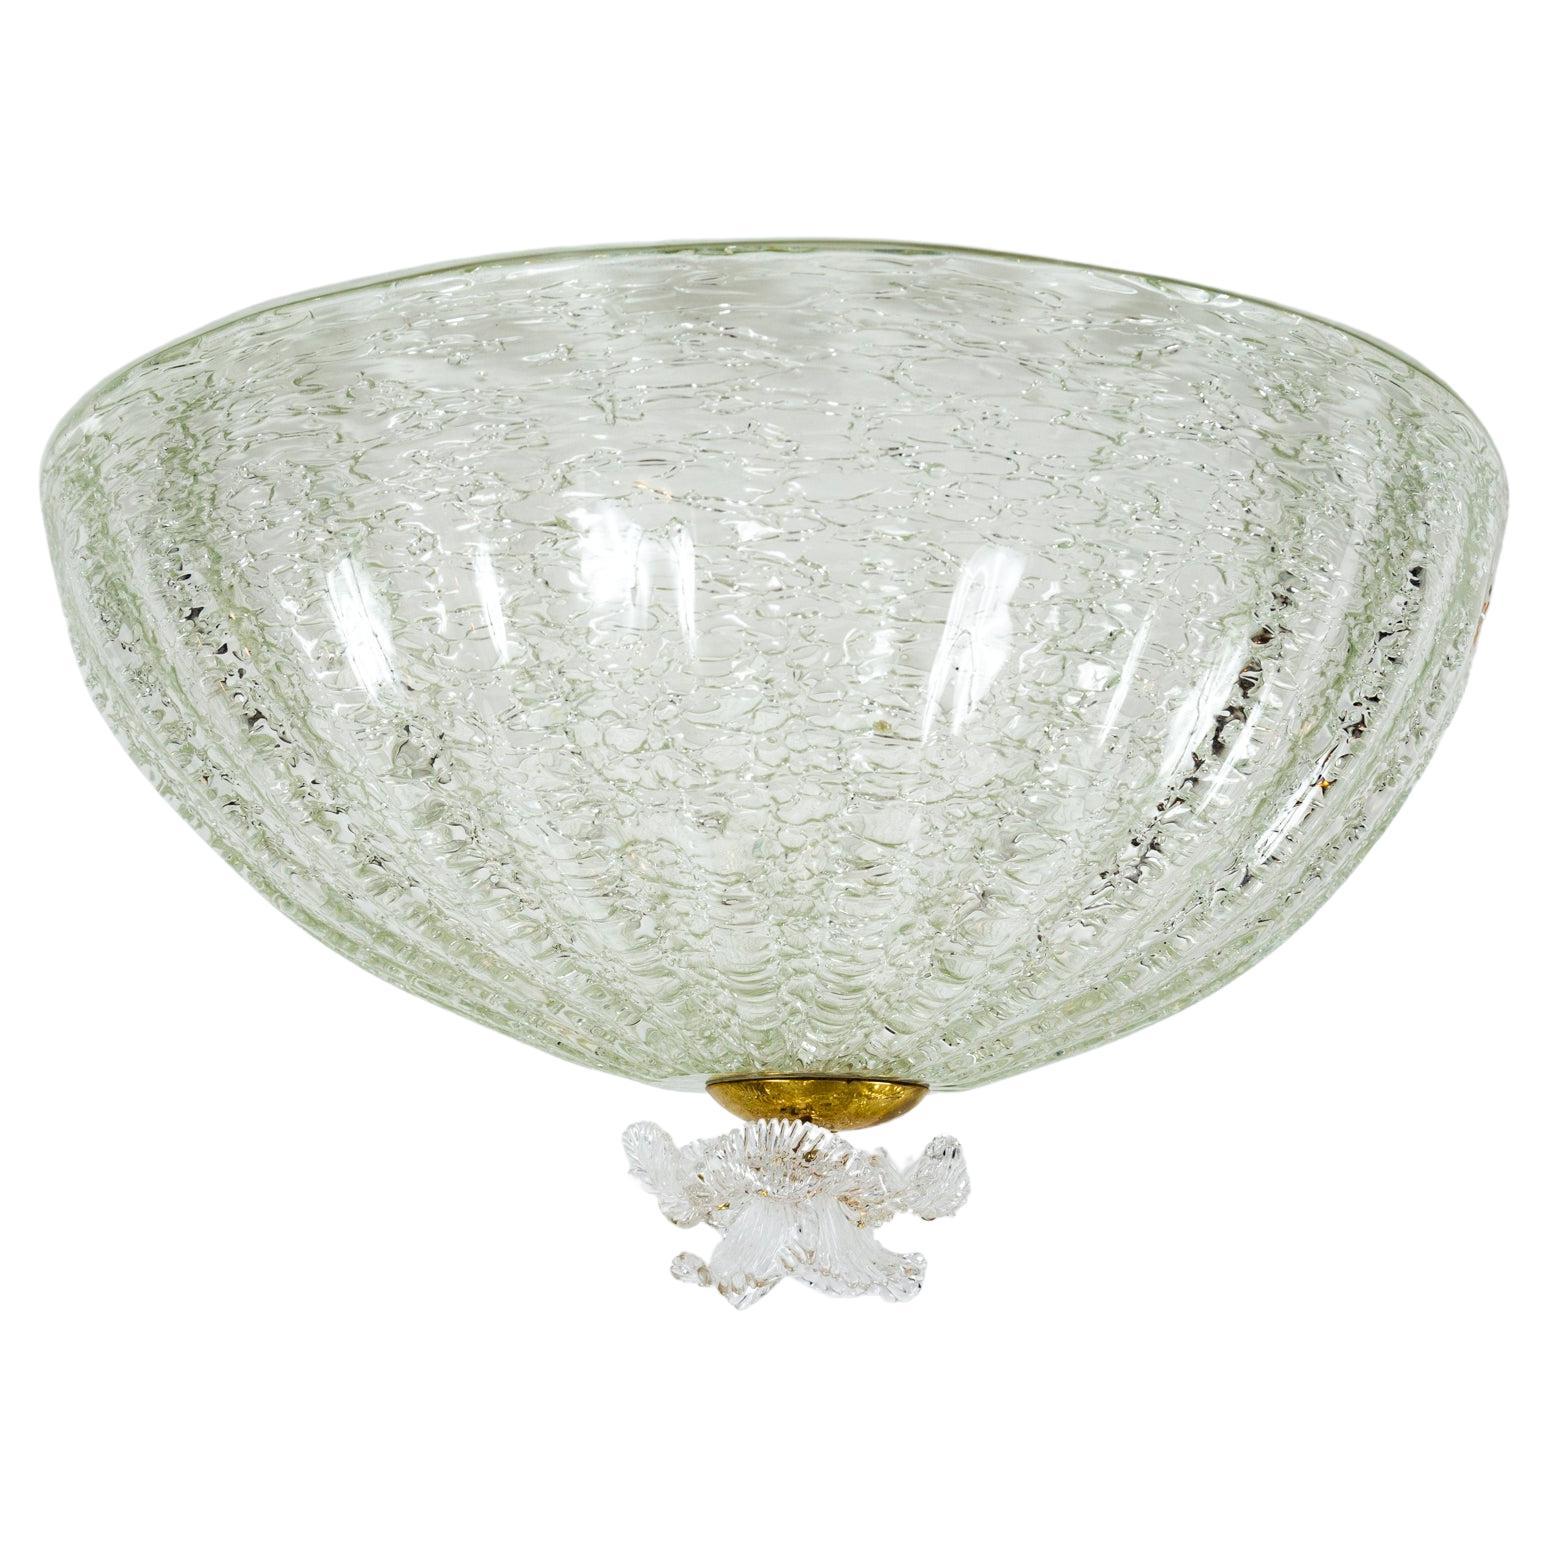 A beautiful pair of deep dome-shaped ceiling fixtures blown in a delicate and rare crackled technique with a delicate glass blown iris finial. Blown in a clear glass however the texture offsets the transparency.
The lamping is yet to be fabricated